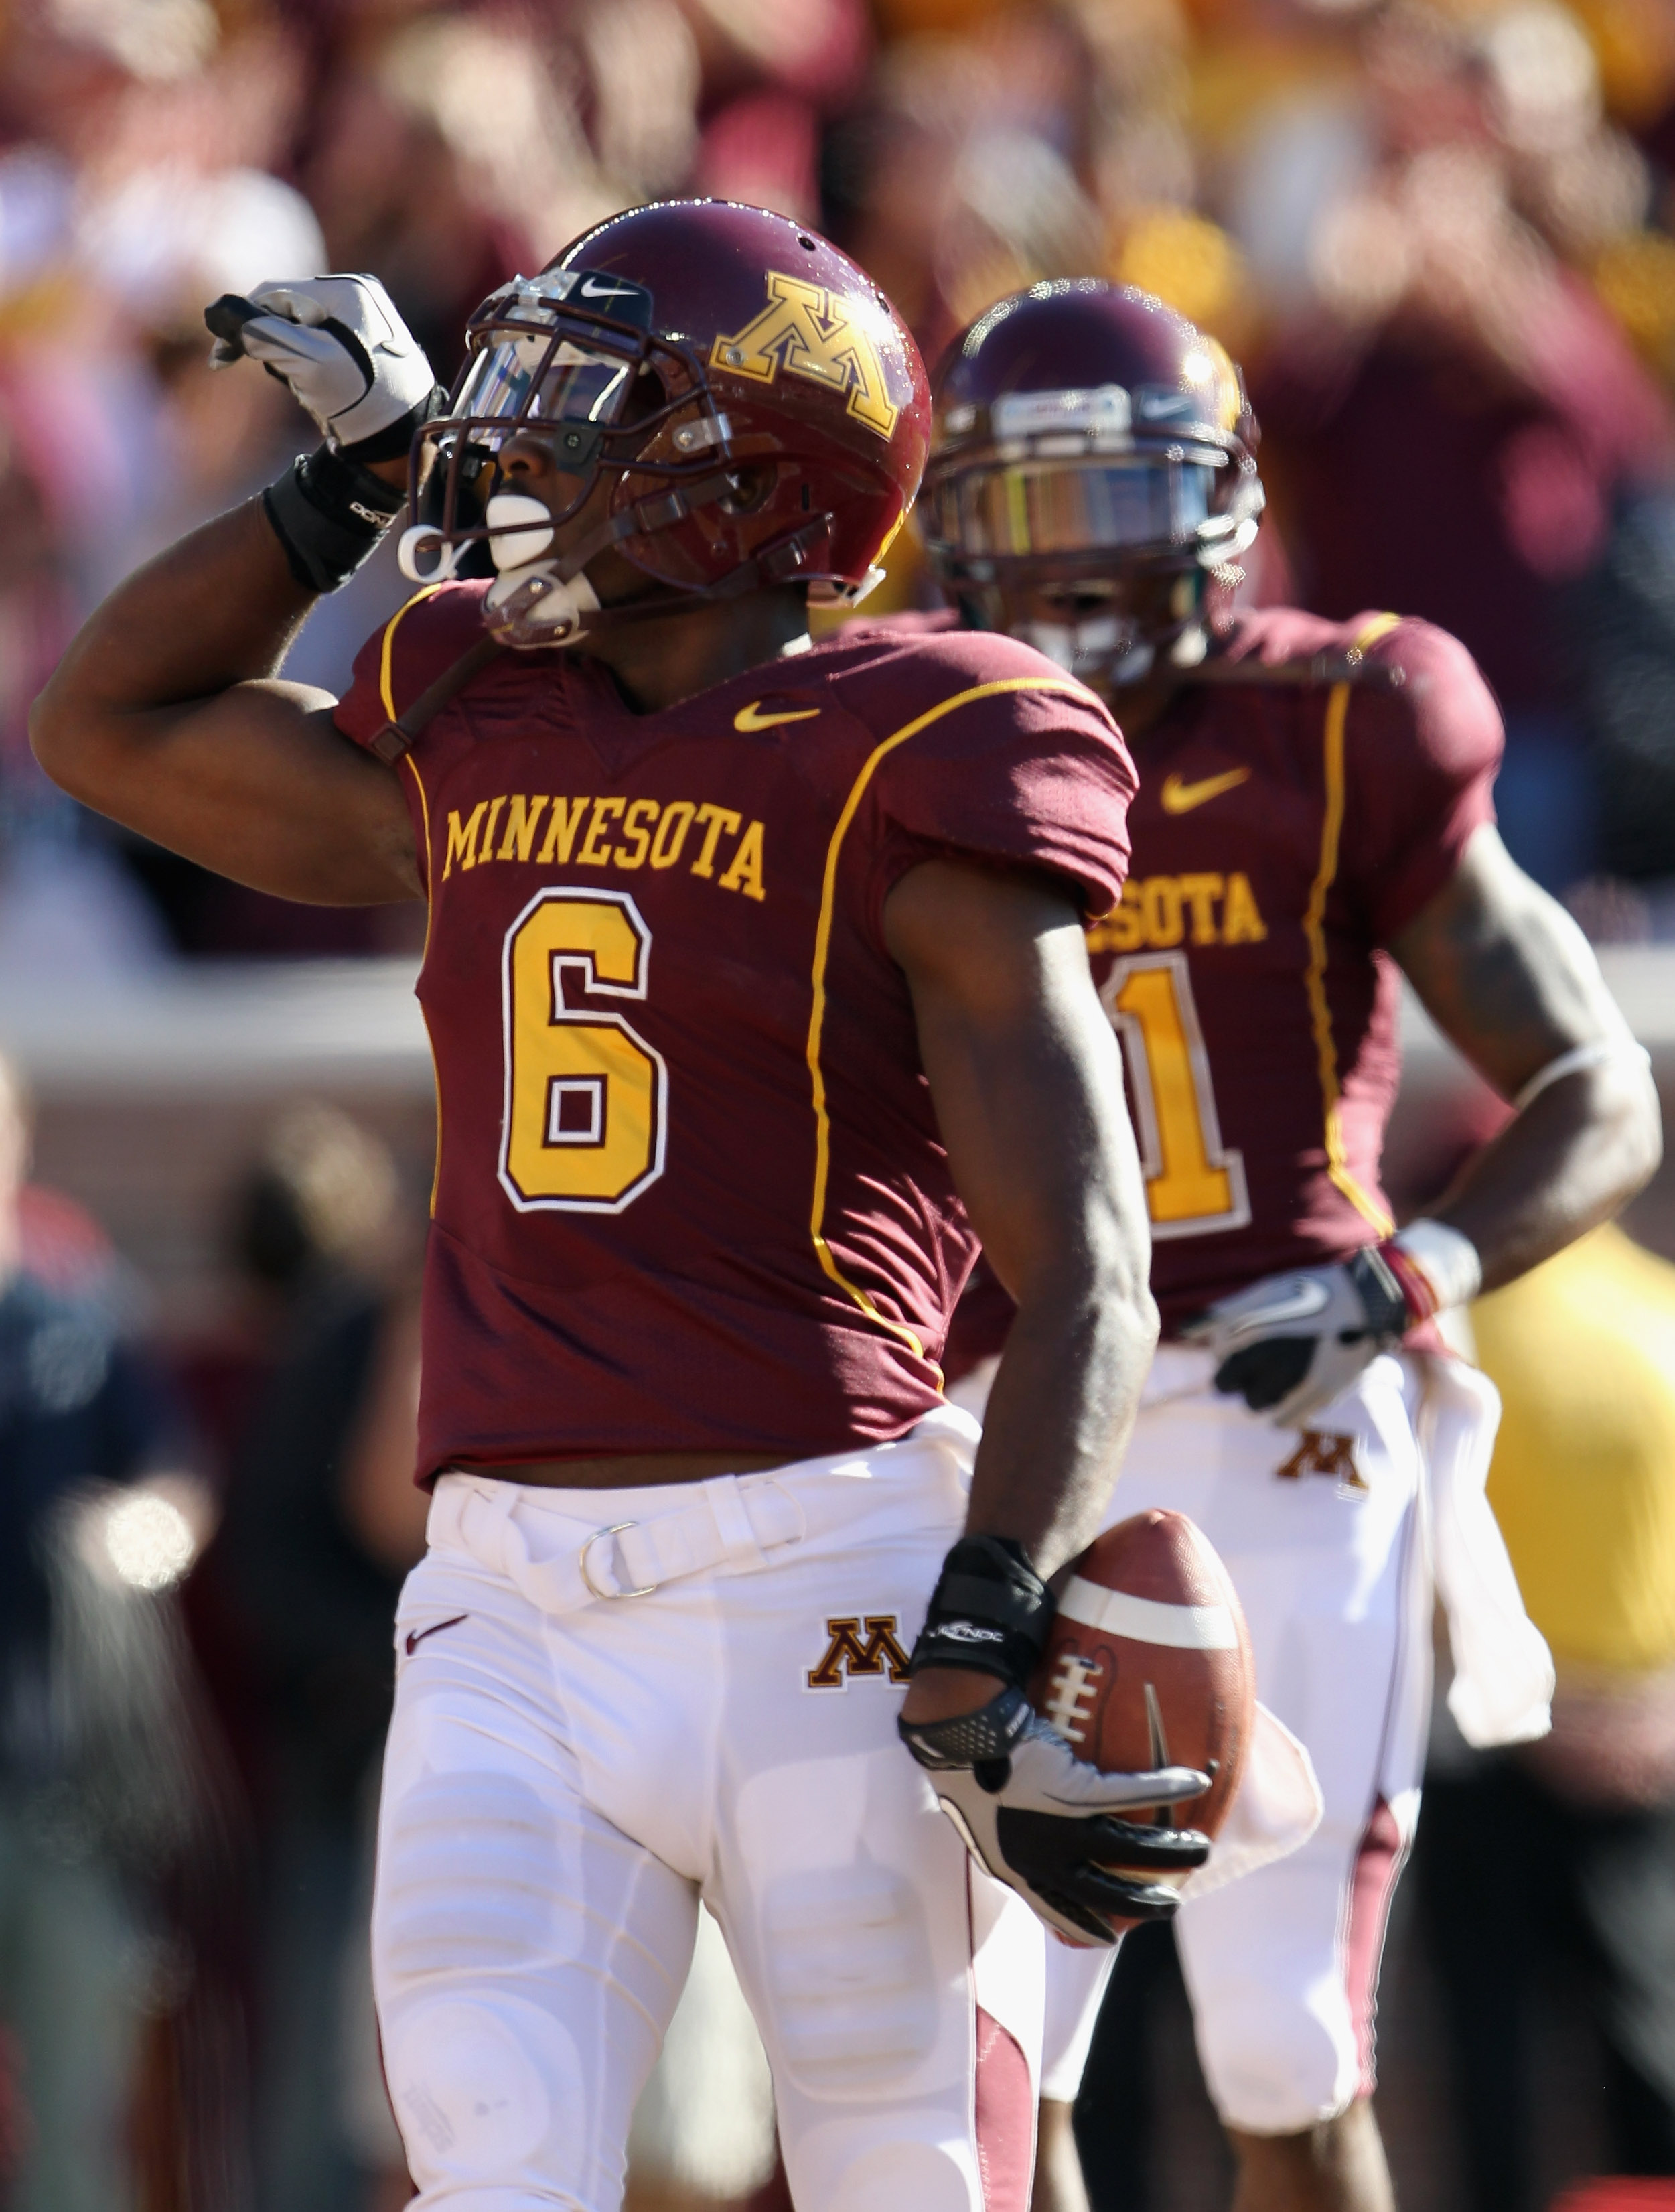 MINNEAPOLIS - SEPTEMBER 18:  Da'Jon McKnight #6 of the Minnesota Golden Gophers celebrates after catching a pass for a touchdown during the game against the USC Trojans on September 18, 2010 at TCF Bank Stadium in Minneapolis, Minnesota.  (Photo by Jamie